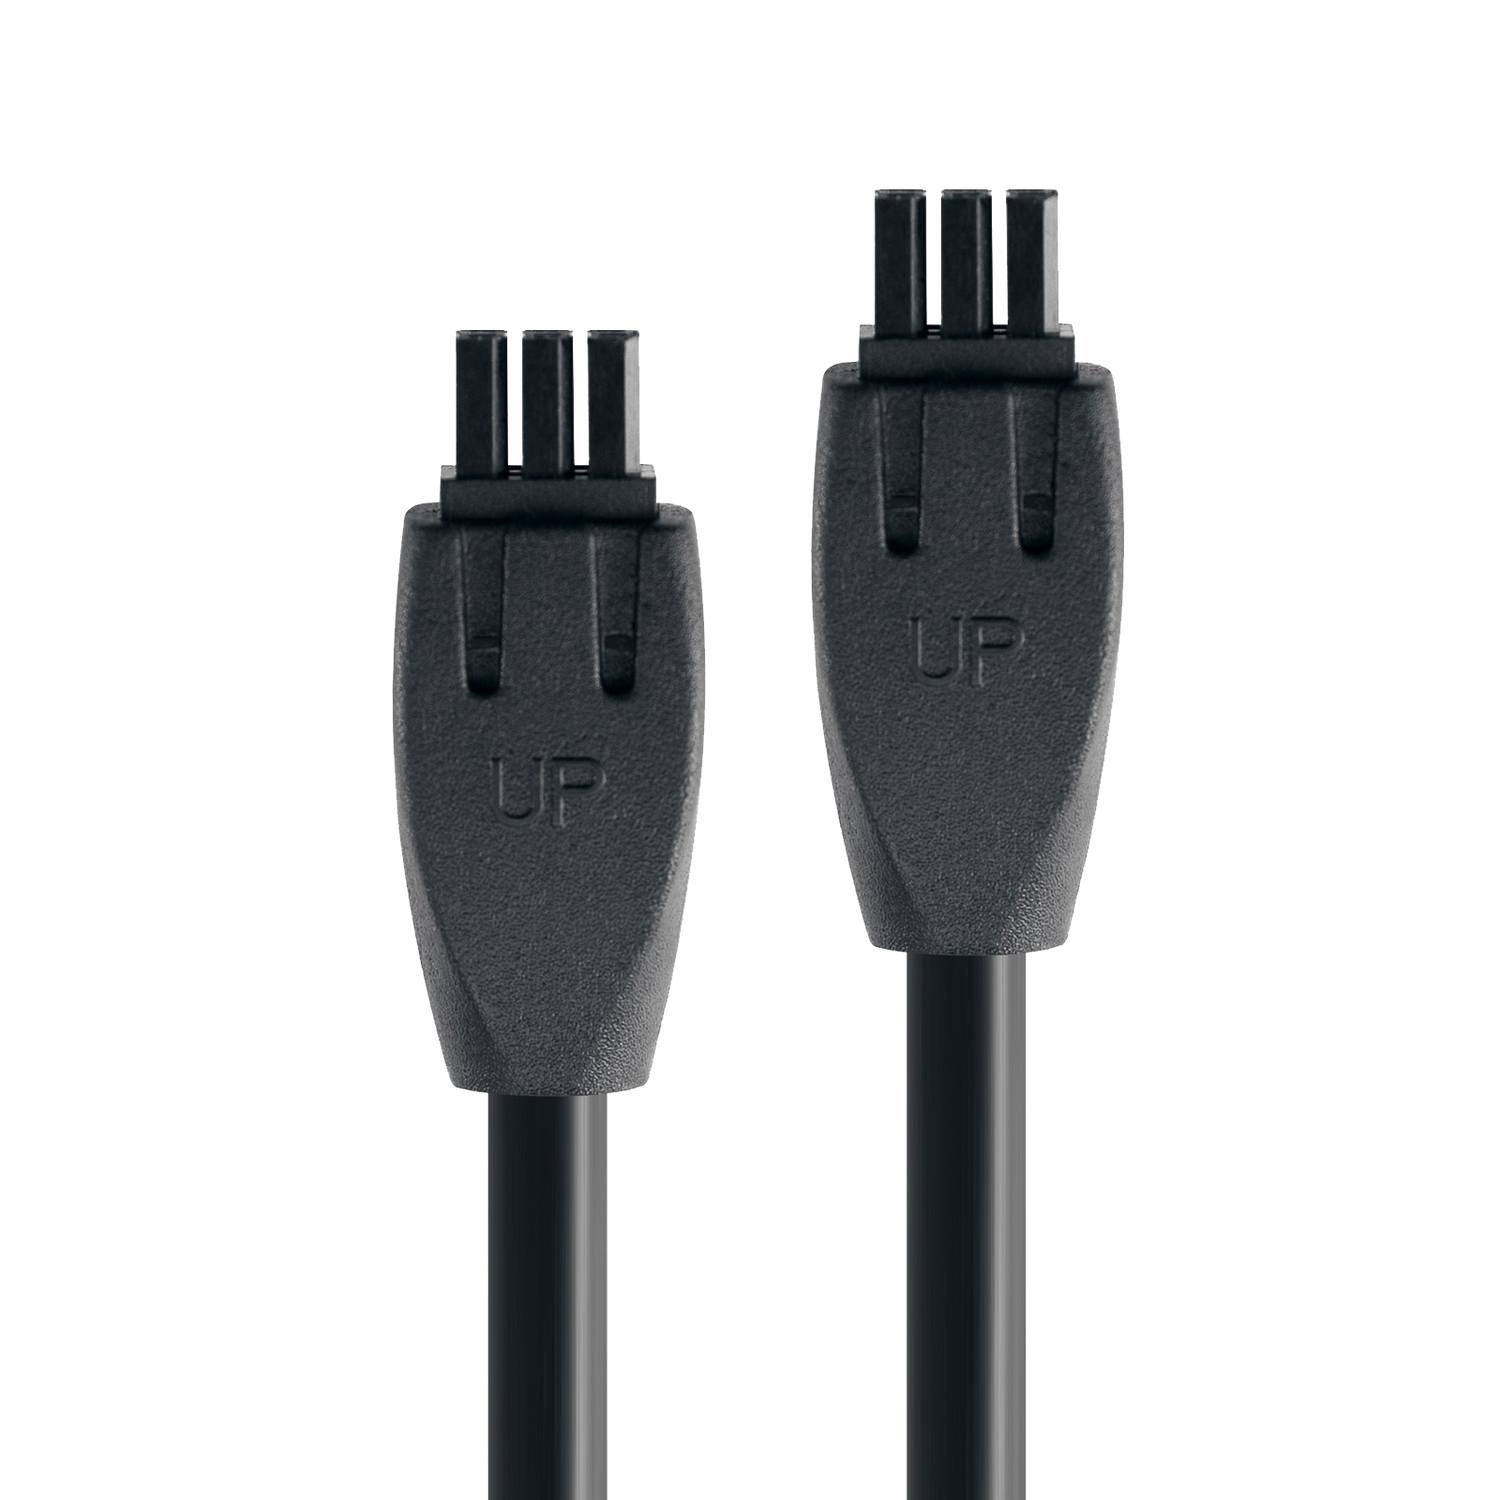 Cable E10/E25 Compatible with the Exclaim and Luna speaker series.